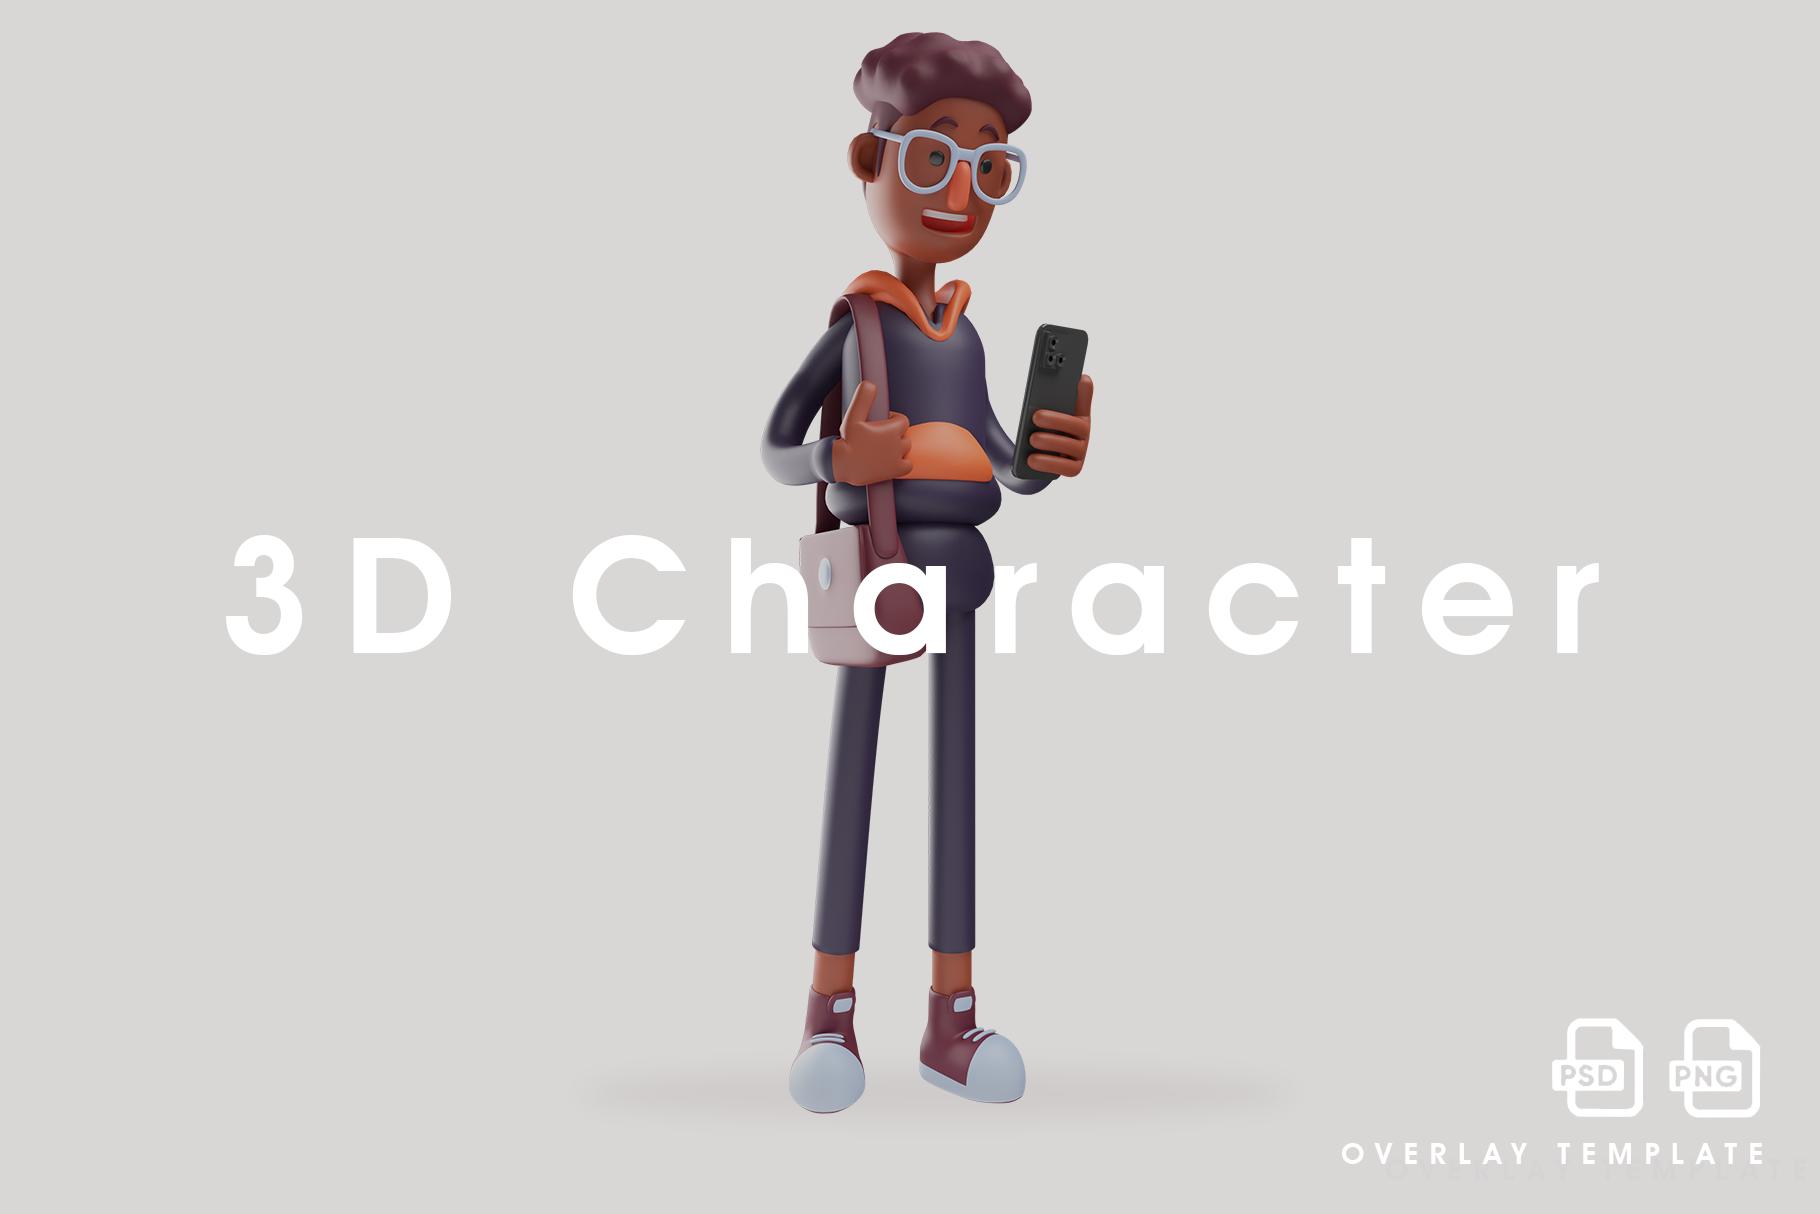 3D Student Cartoon Holding a Cell Phone